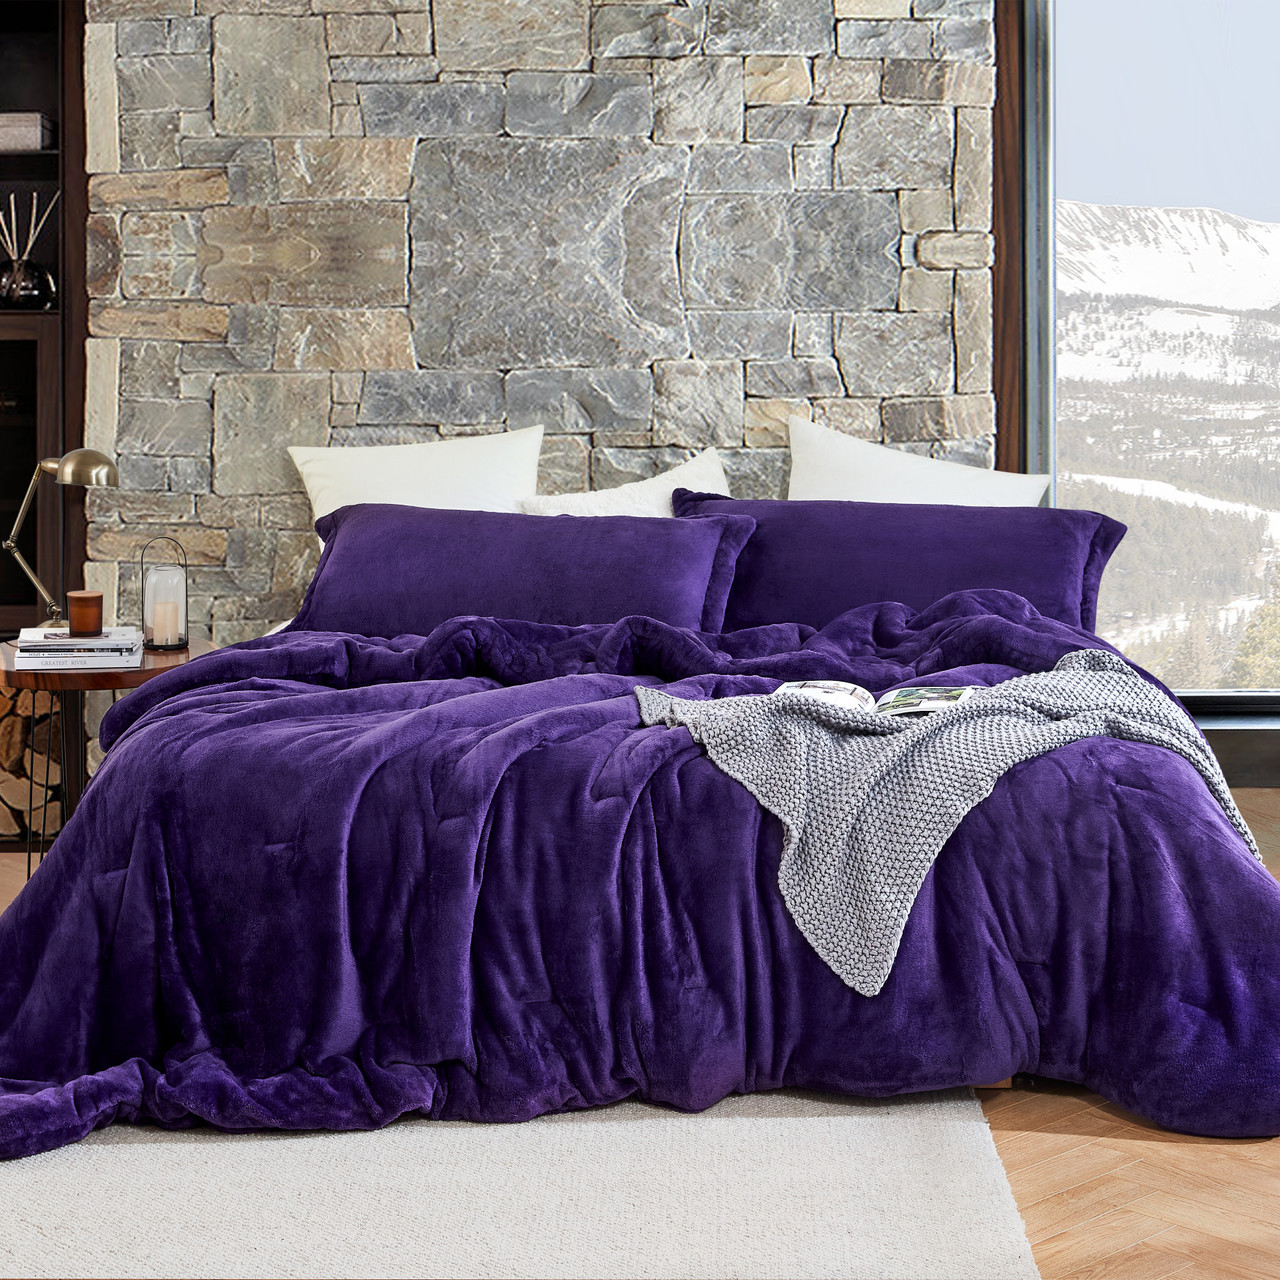 Coma Inducer Oversized King Comforter - Me Sooo Comfy - Purple Reign